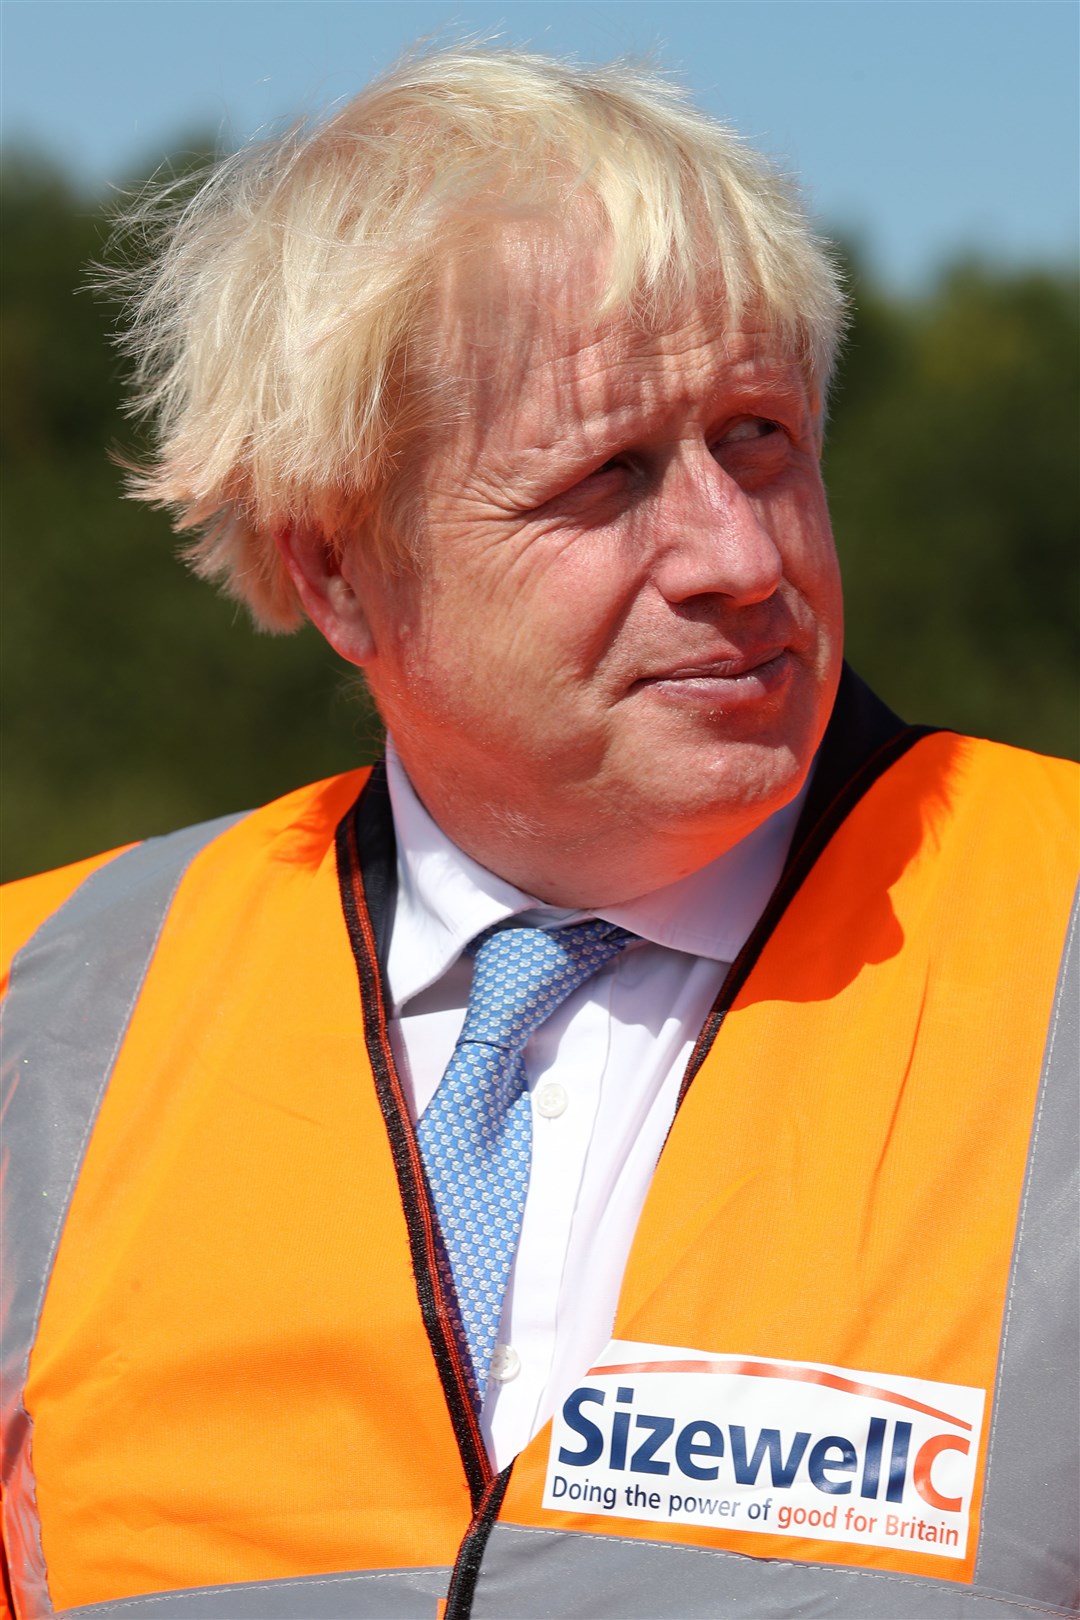 Then-prime minister Boris Johnson during a visit to EDF’s Sizewell B nuclear power station in Suffolk on September 1, 2022 (Chris Radburn/PA)